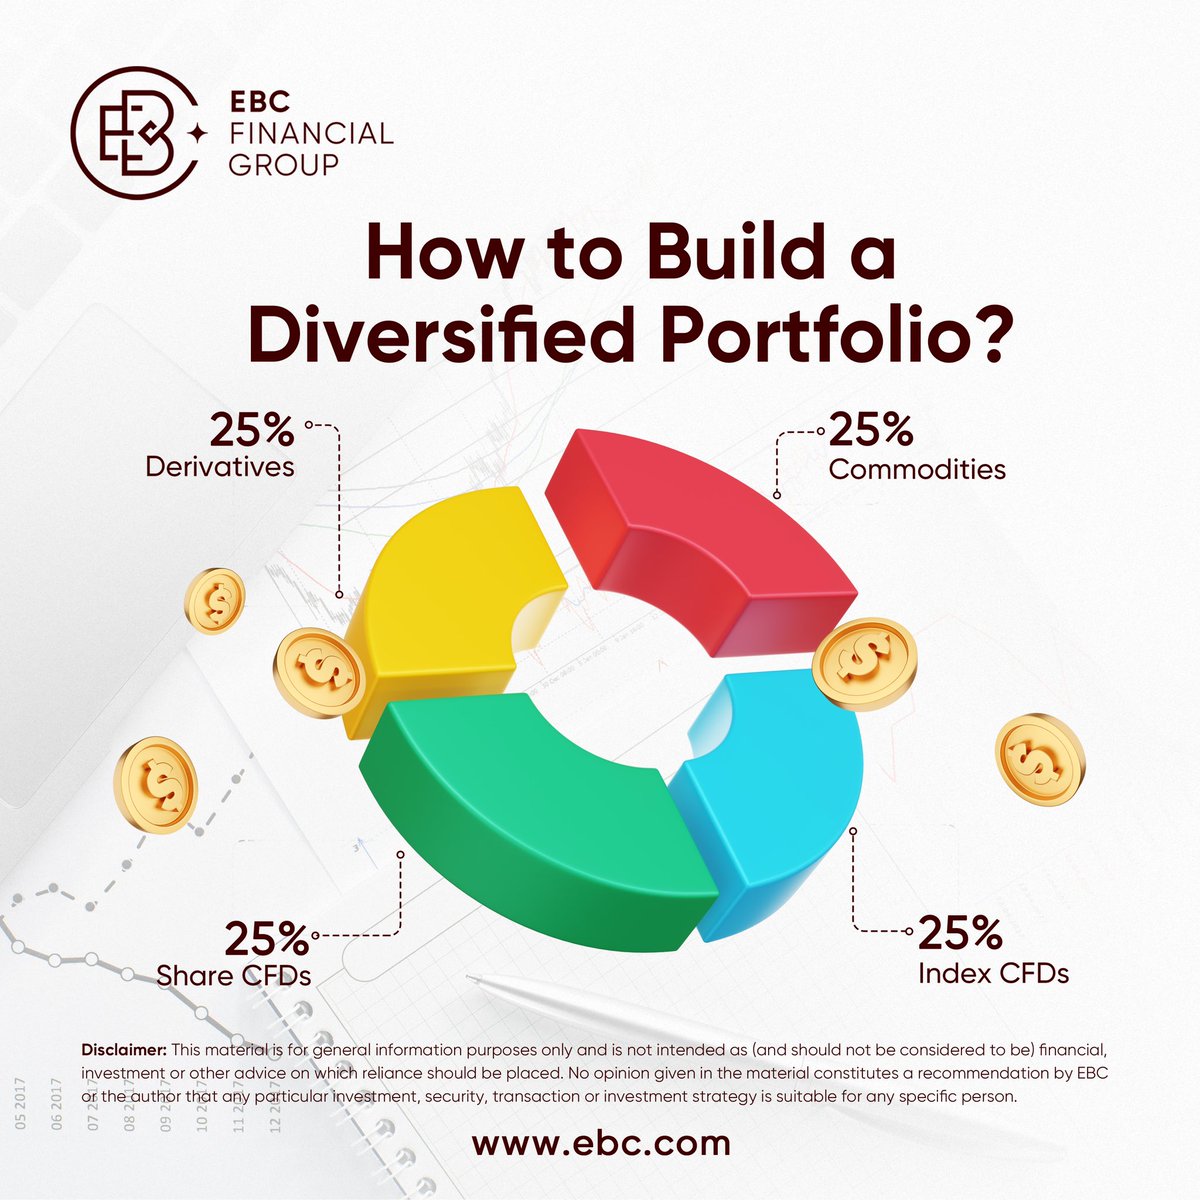 Traders adept at risk management typically maintain a well-rounded, diversified portfolio. Are you also embracing diversity in your portfolio? How varied are your investments? Where Your Goals Begin Visit our website: ebc.com #ForexTrading #TradingPortfolio